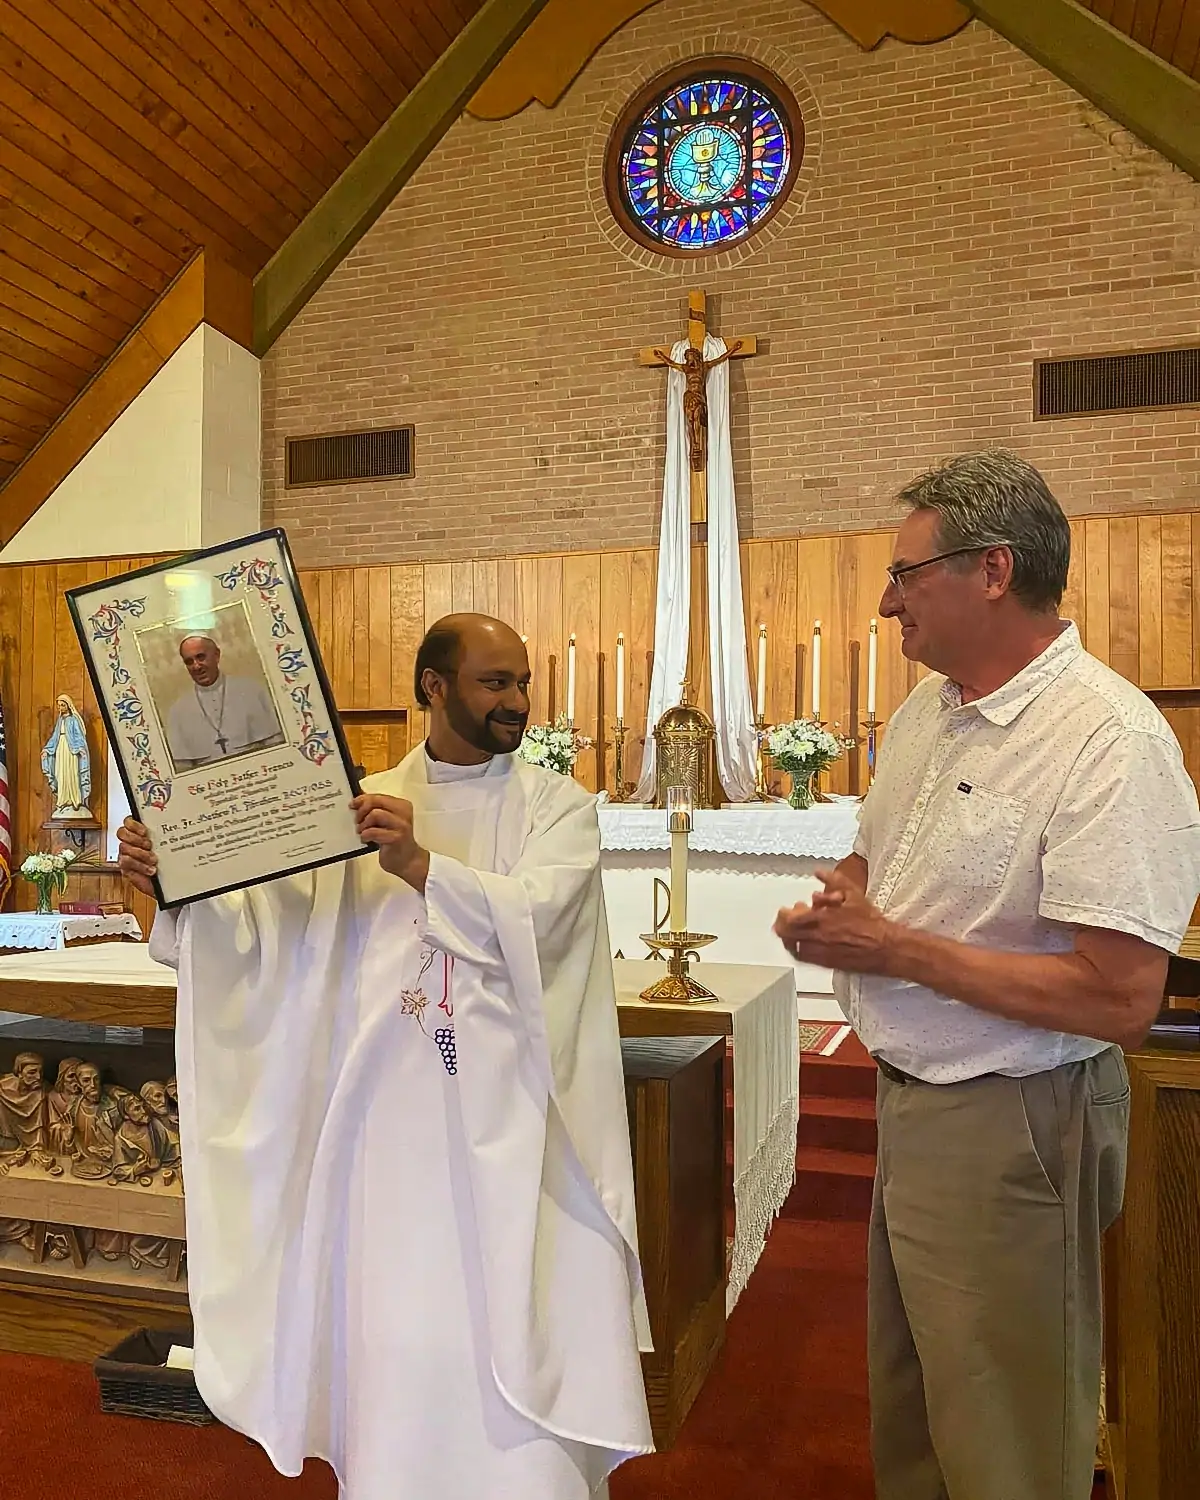 Fr. Mathew presented with the Papal Blessing from the parish by Reed Carpenter